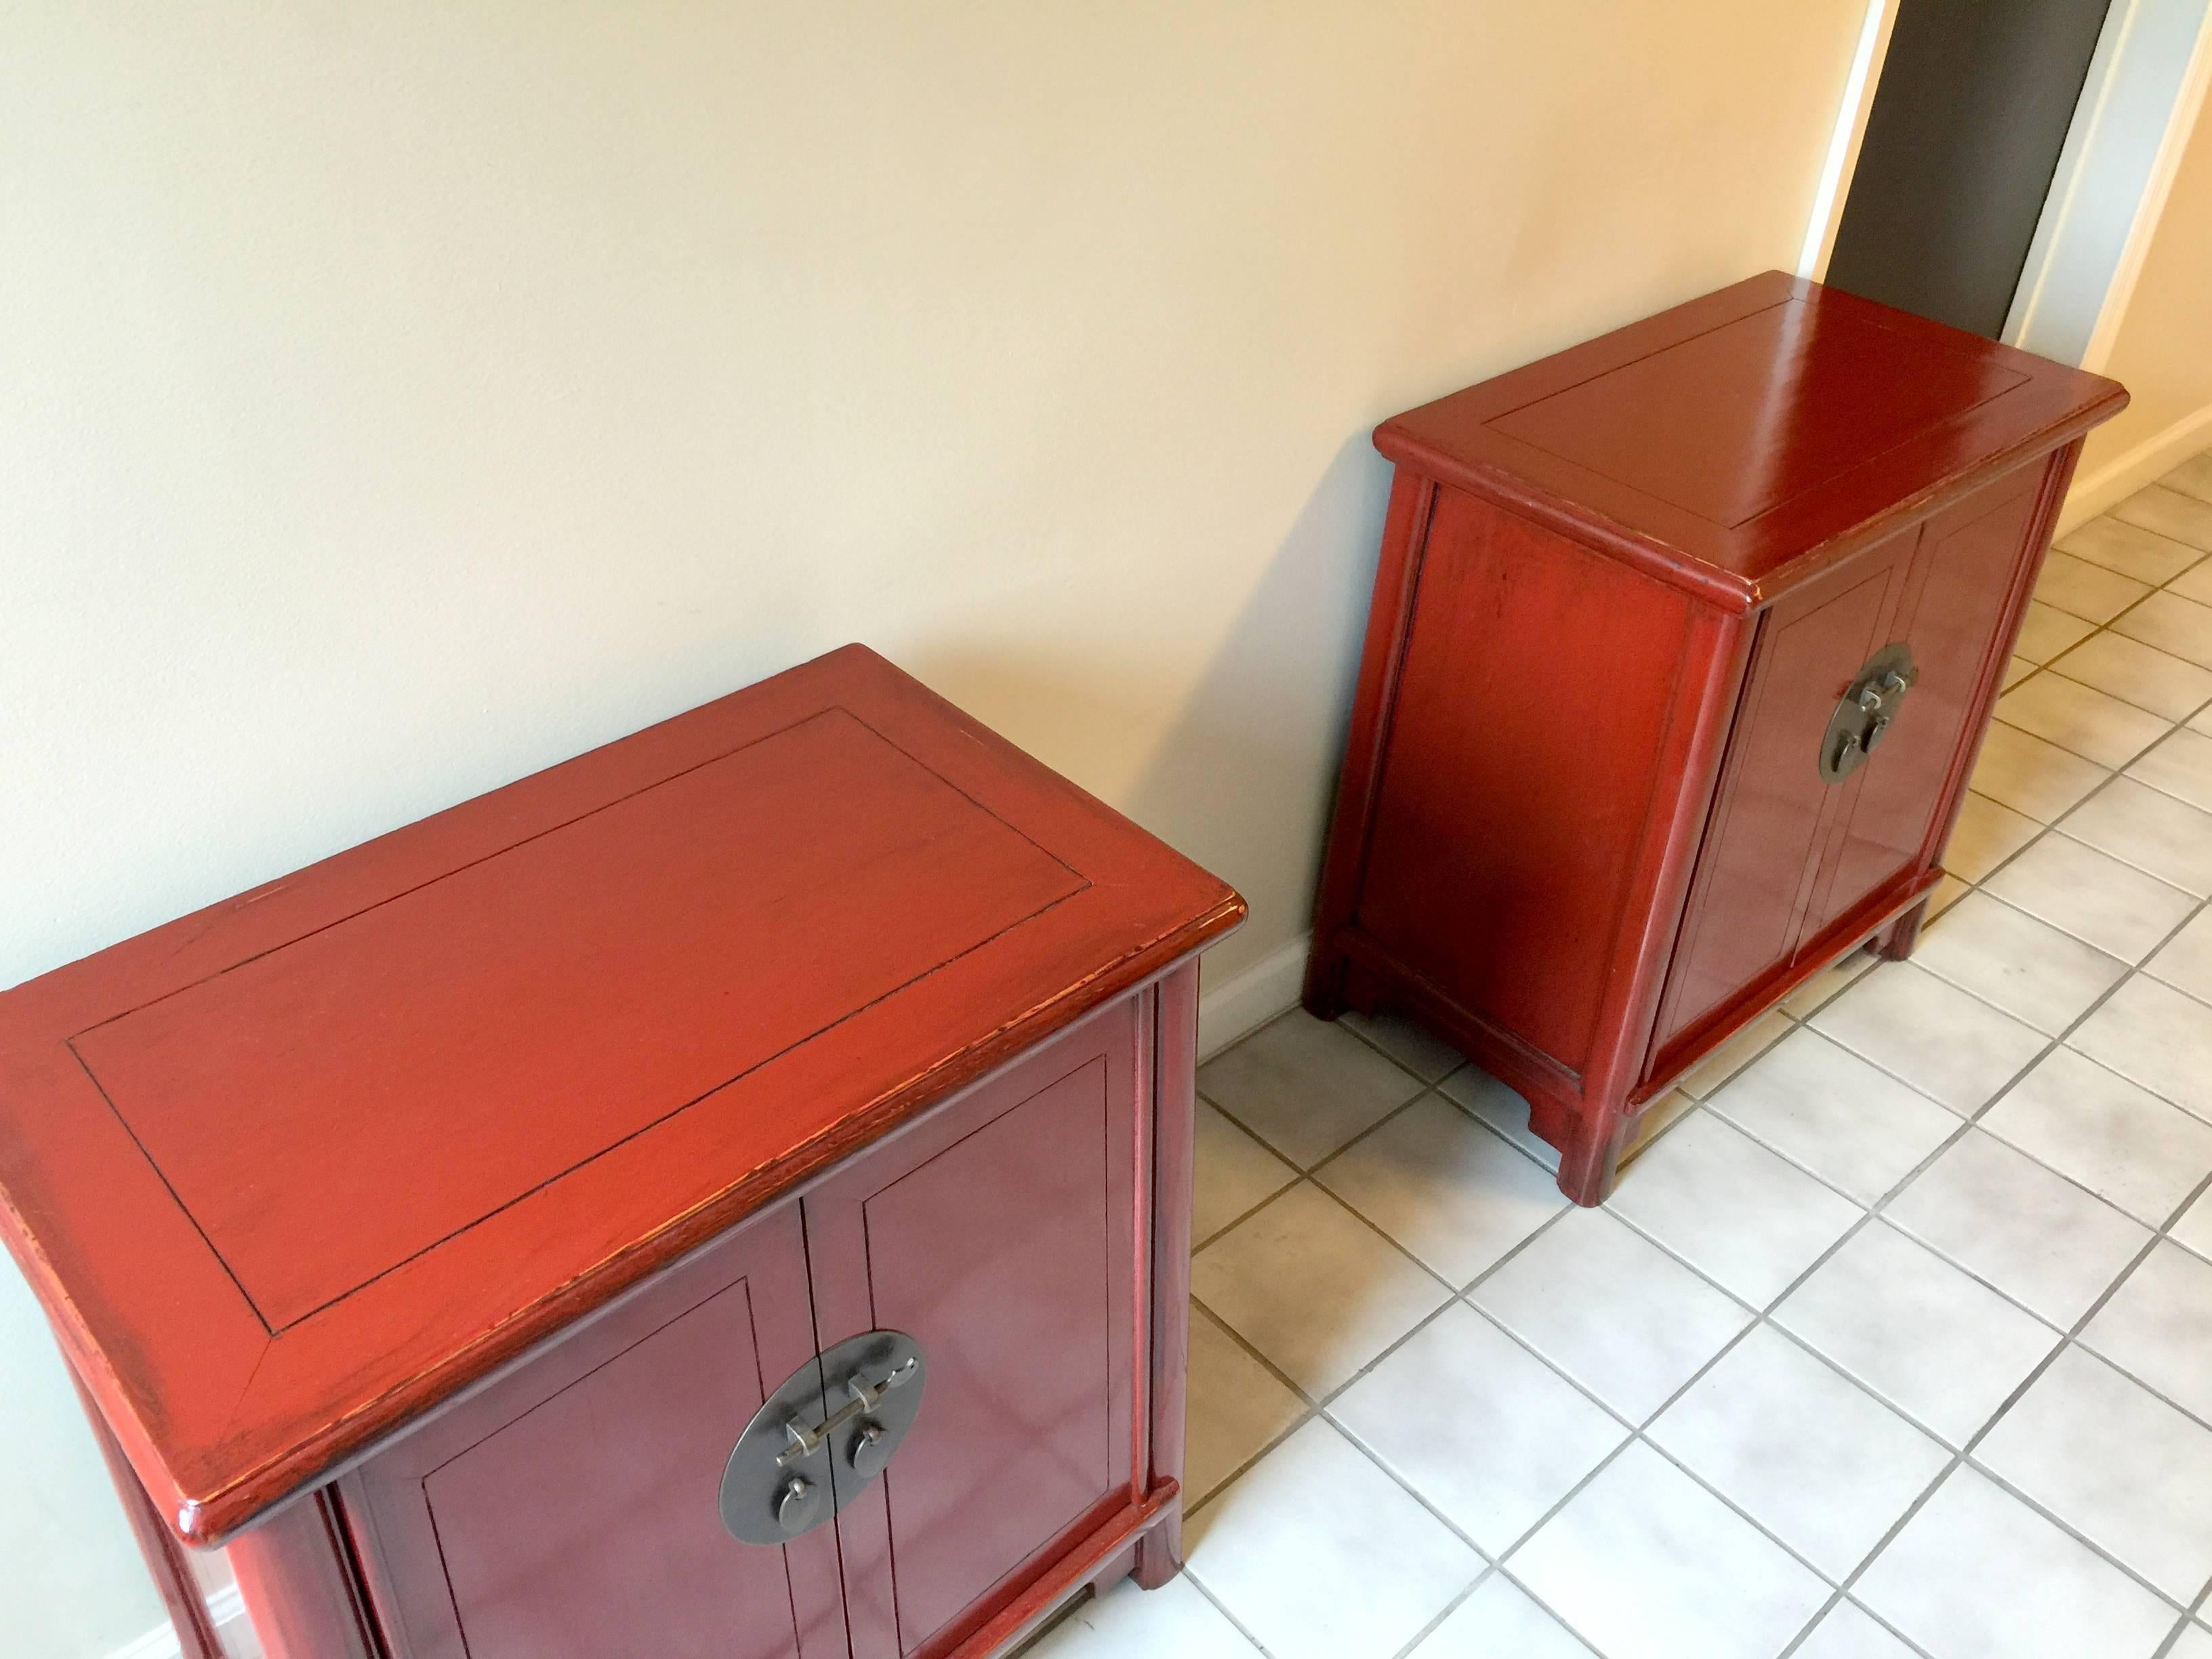 Pair of Elegant Red Lacquer Chests (Lack)